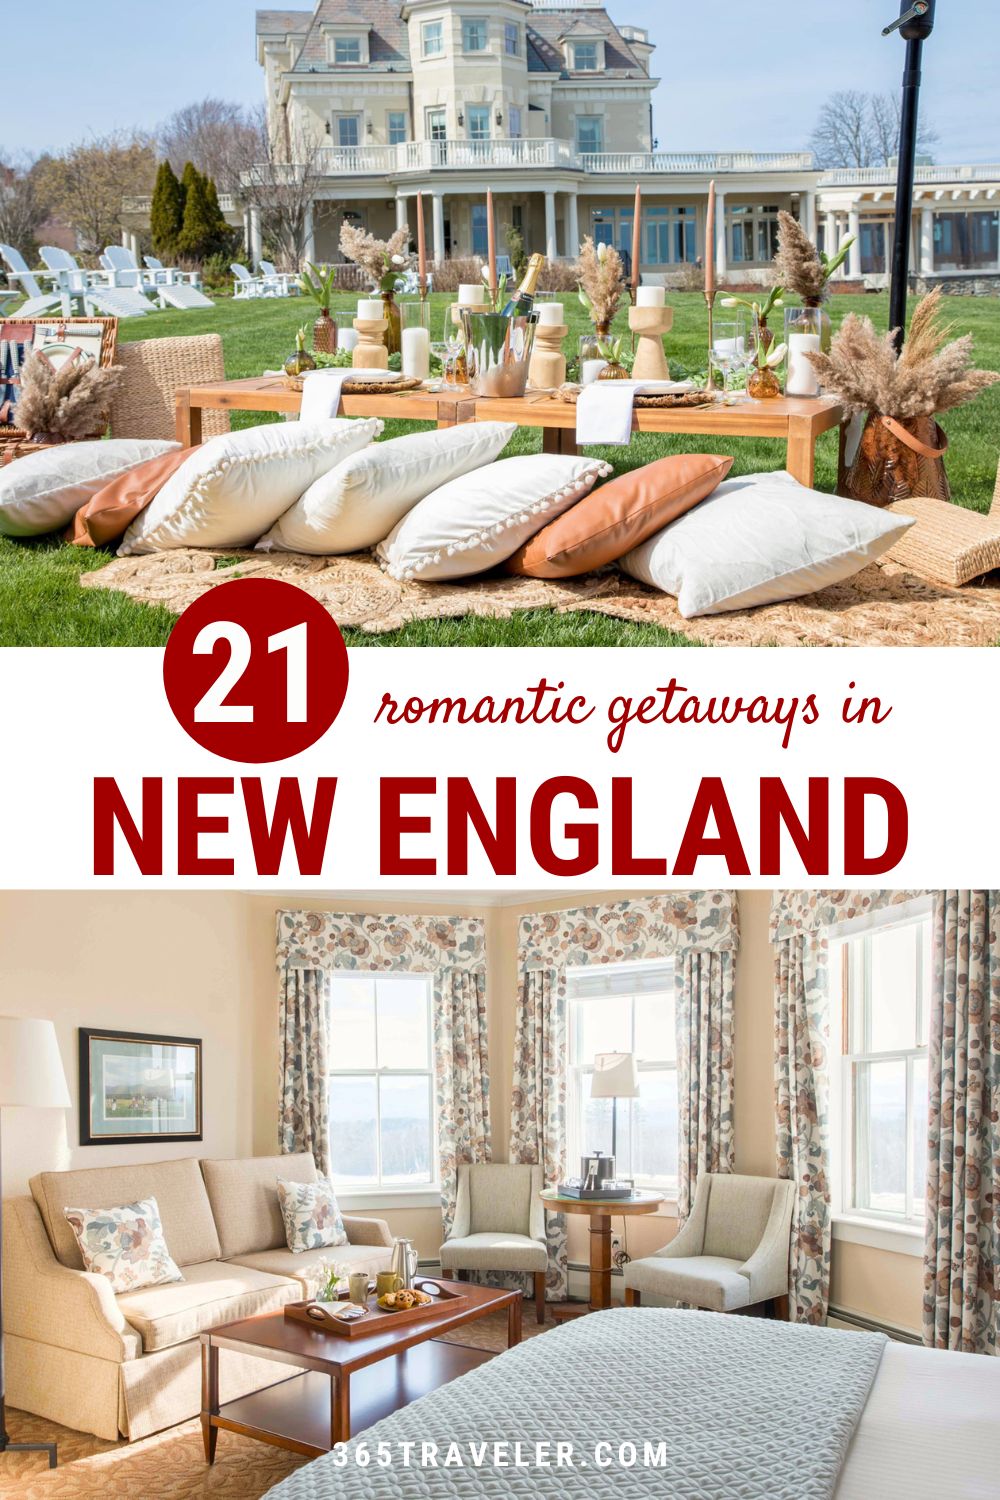 21 ROMANTIC GETAWAYS IN NEW ENGLAND YOU'LL ADORE